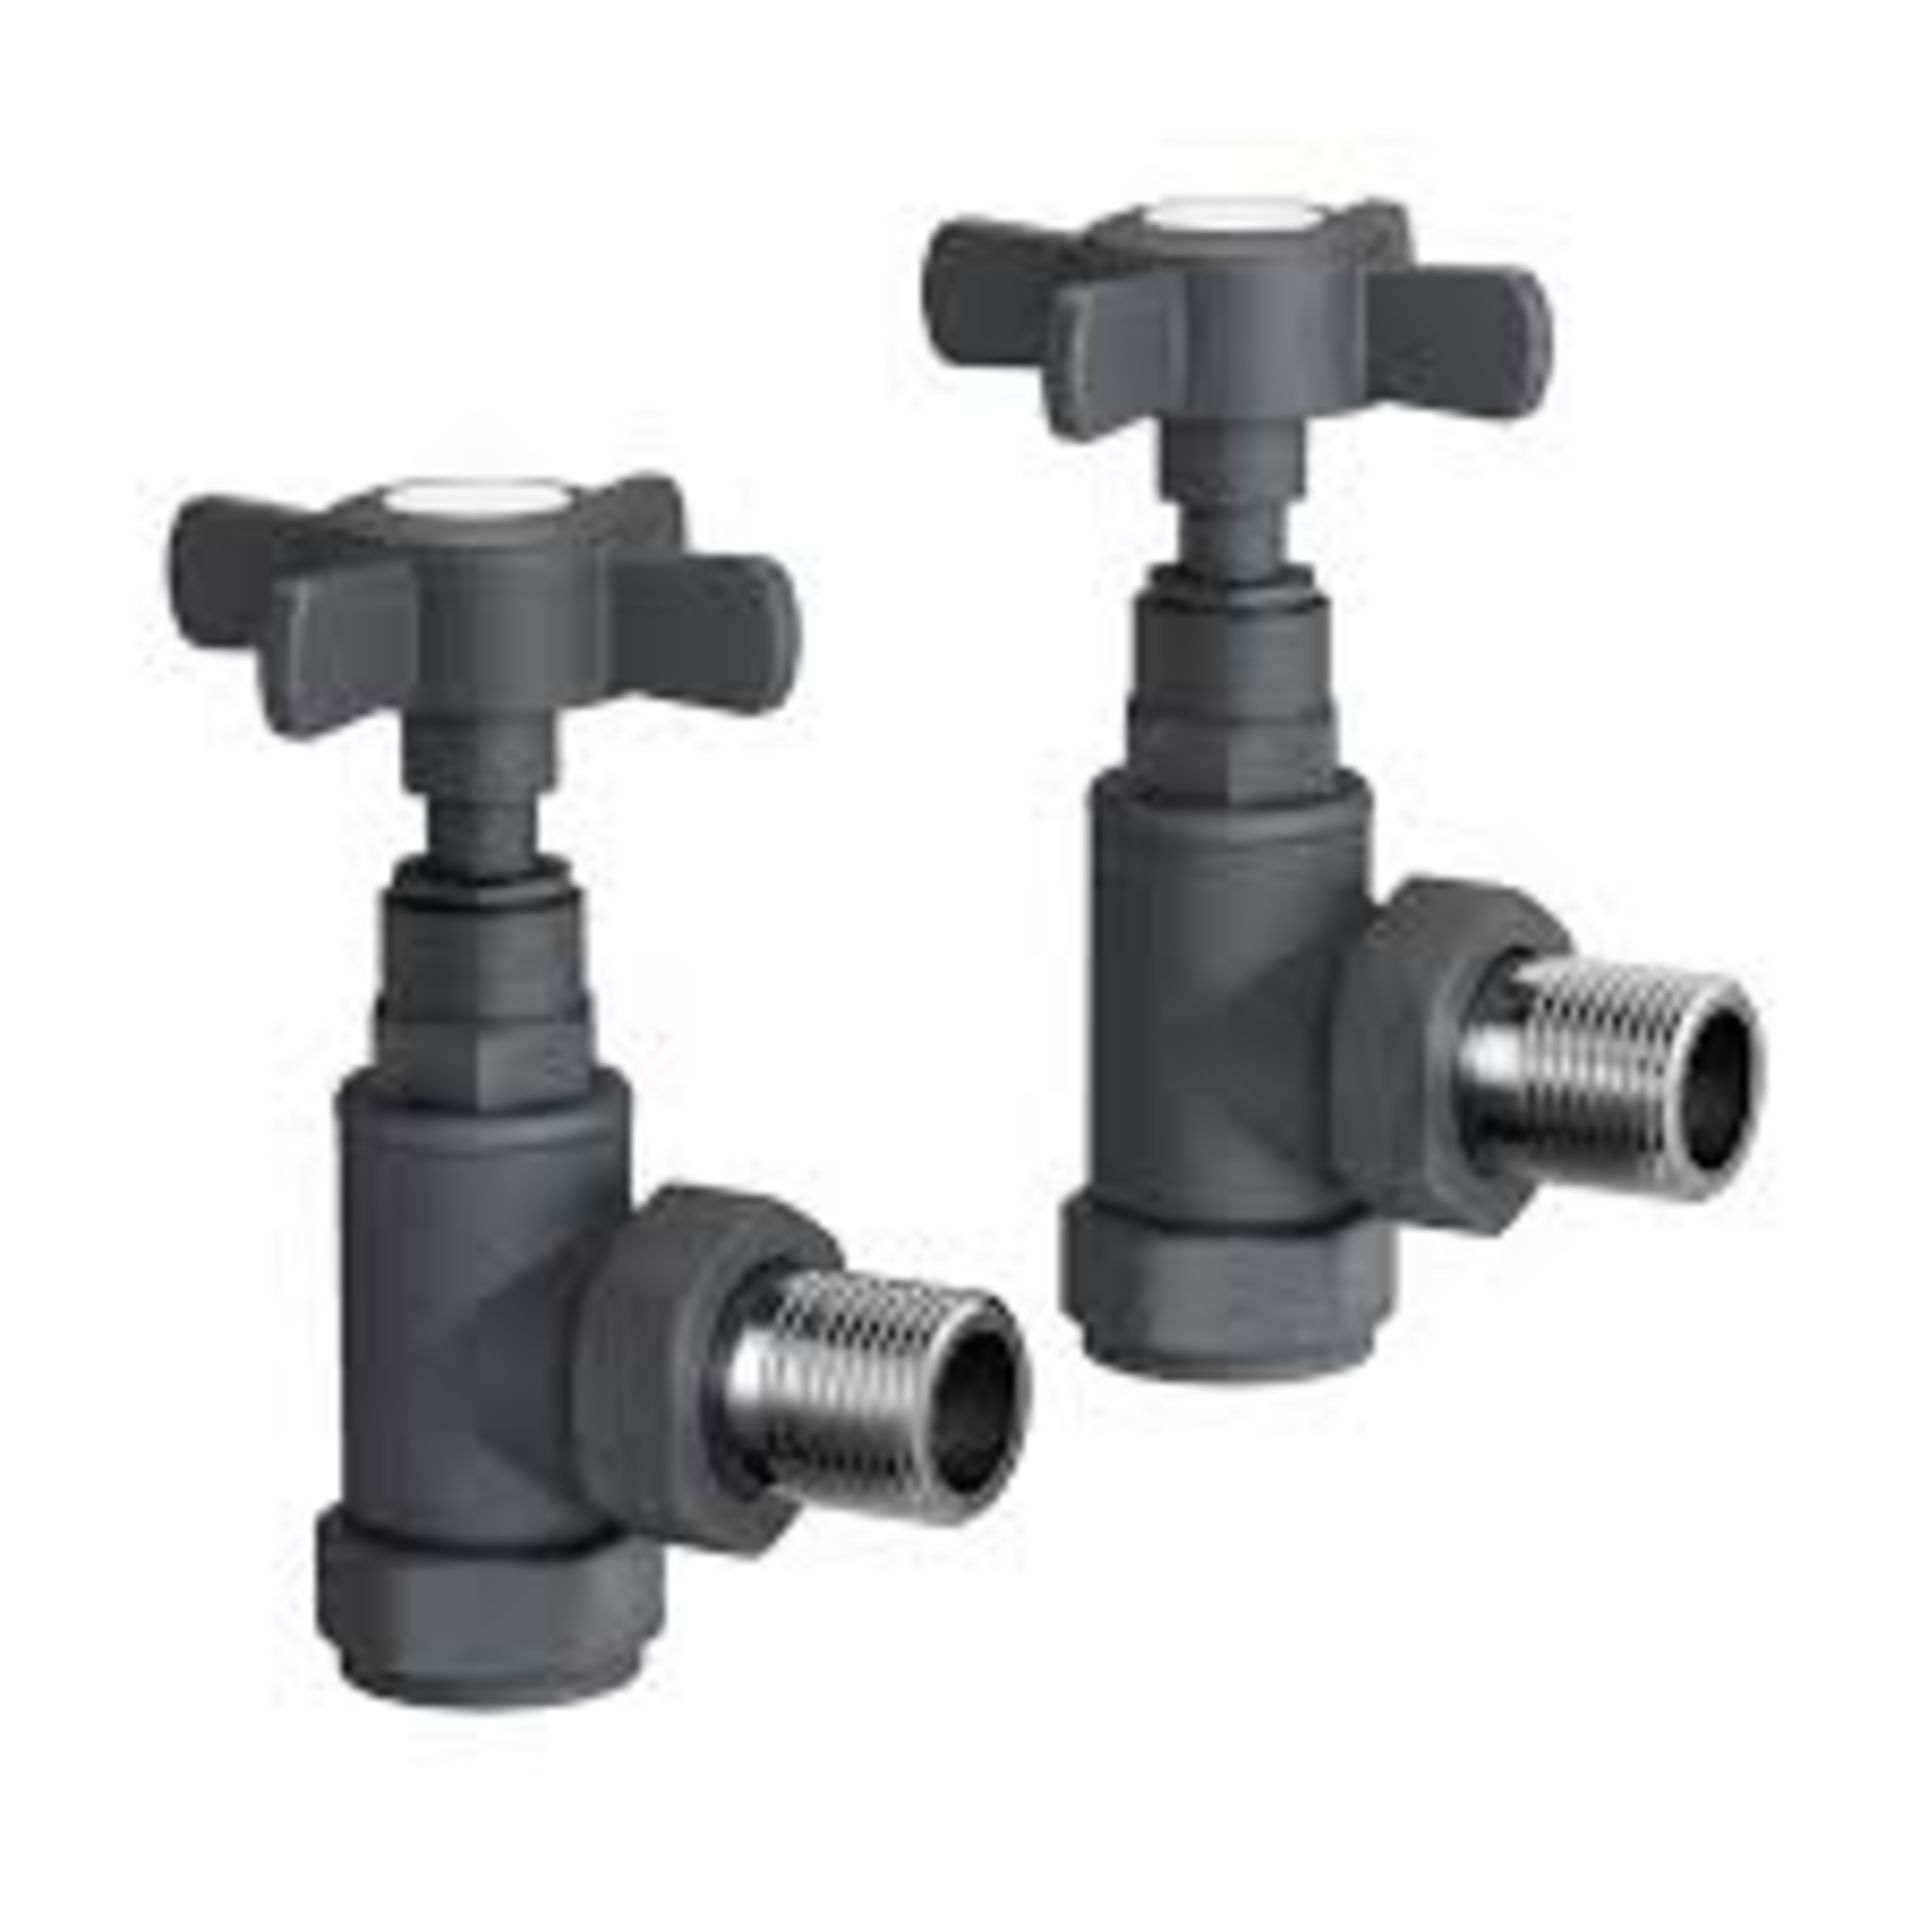 Anthracite Standard Connection Angled Radiator Valves. RA05A. 15mm standard connection. Angled ... - Image 2 of 2